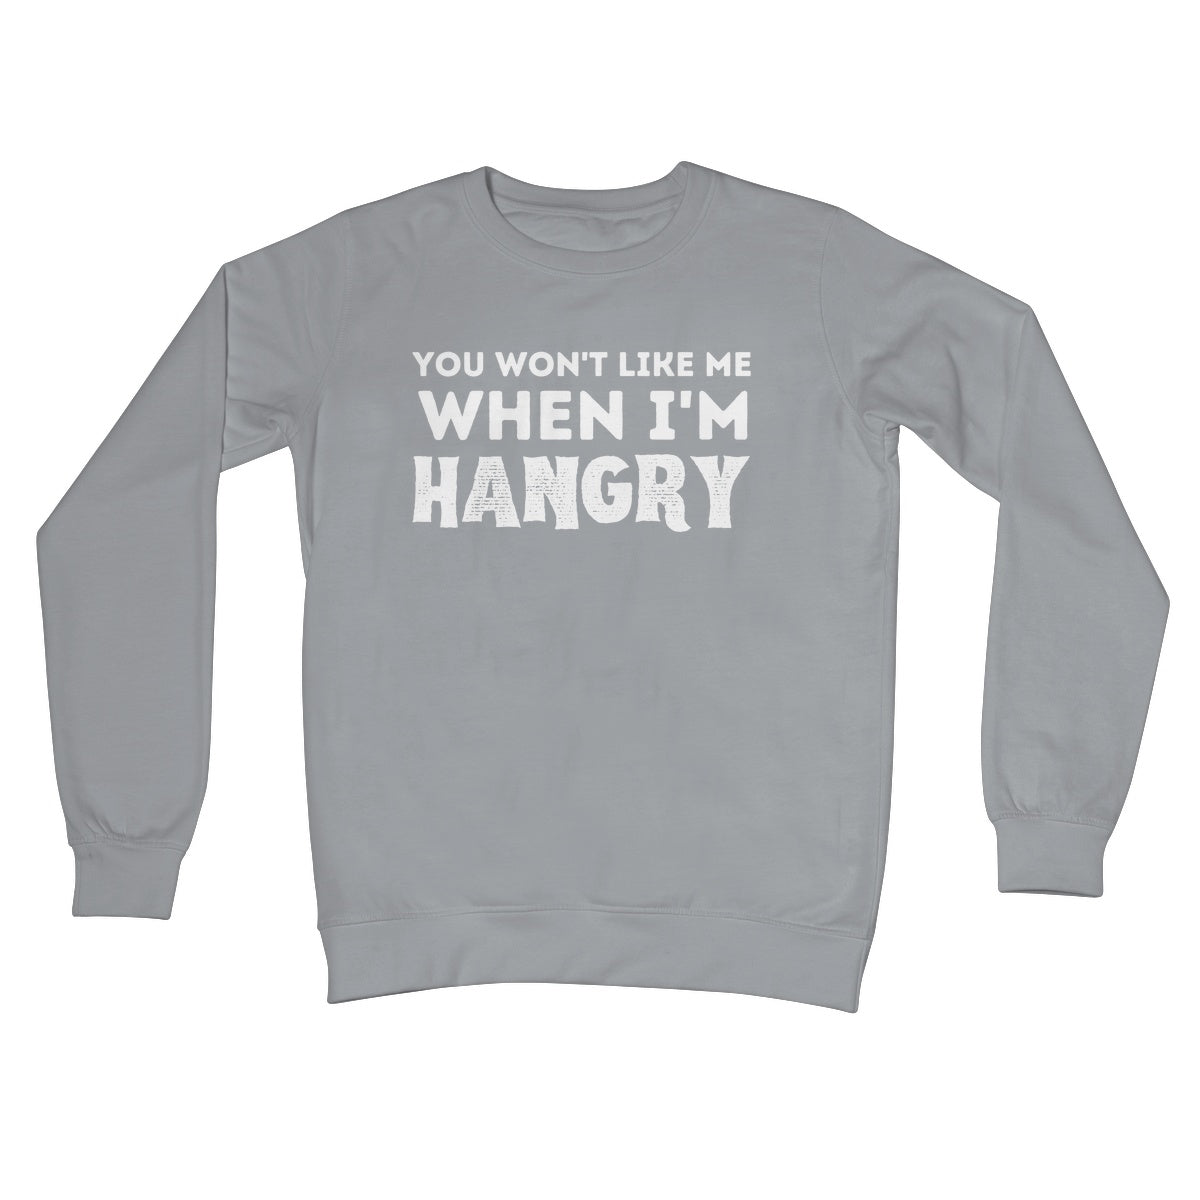 you won't like me when I'm hangry jumper grey